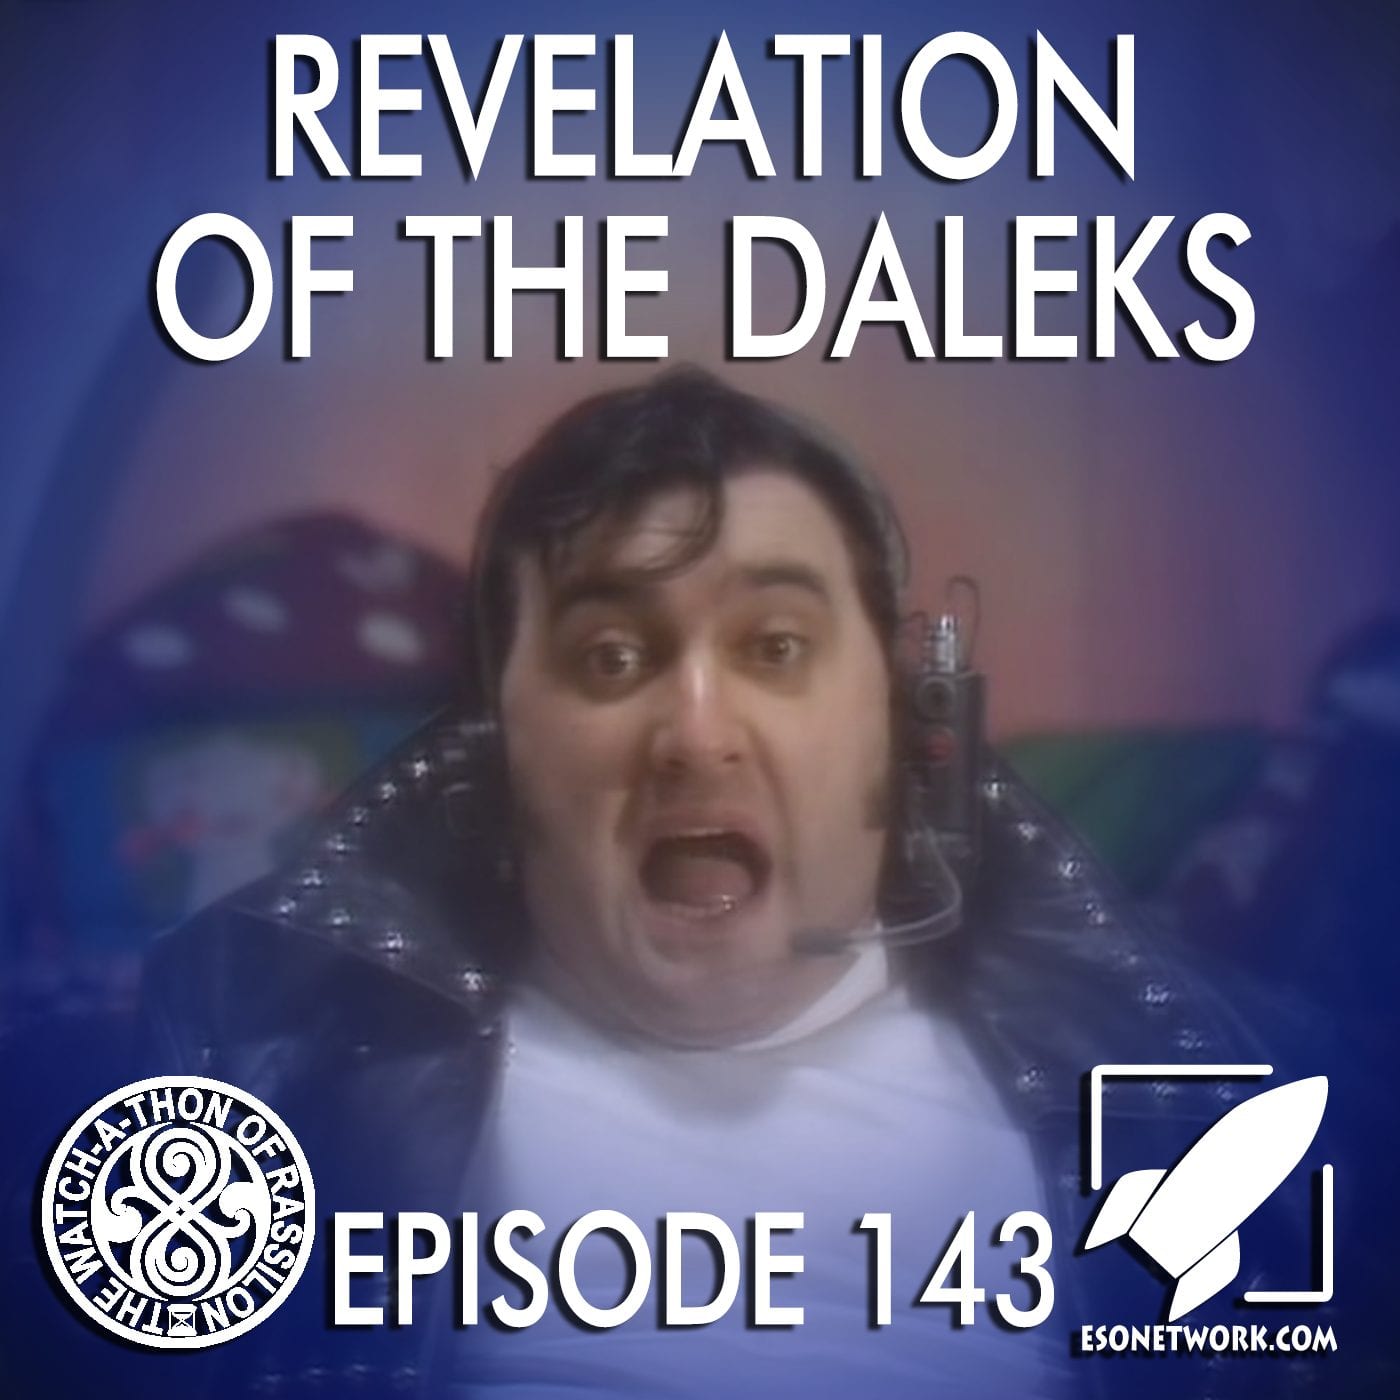 The Watch-A-Thon of Rassilon: Episode 143: Revelation of the Daleks